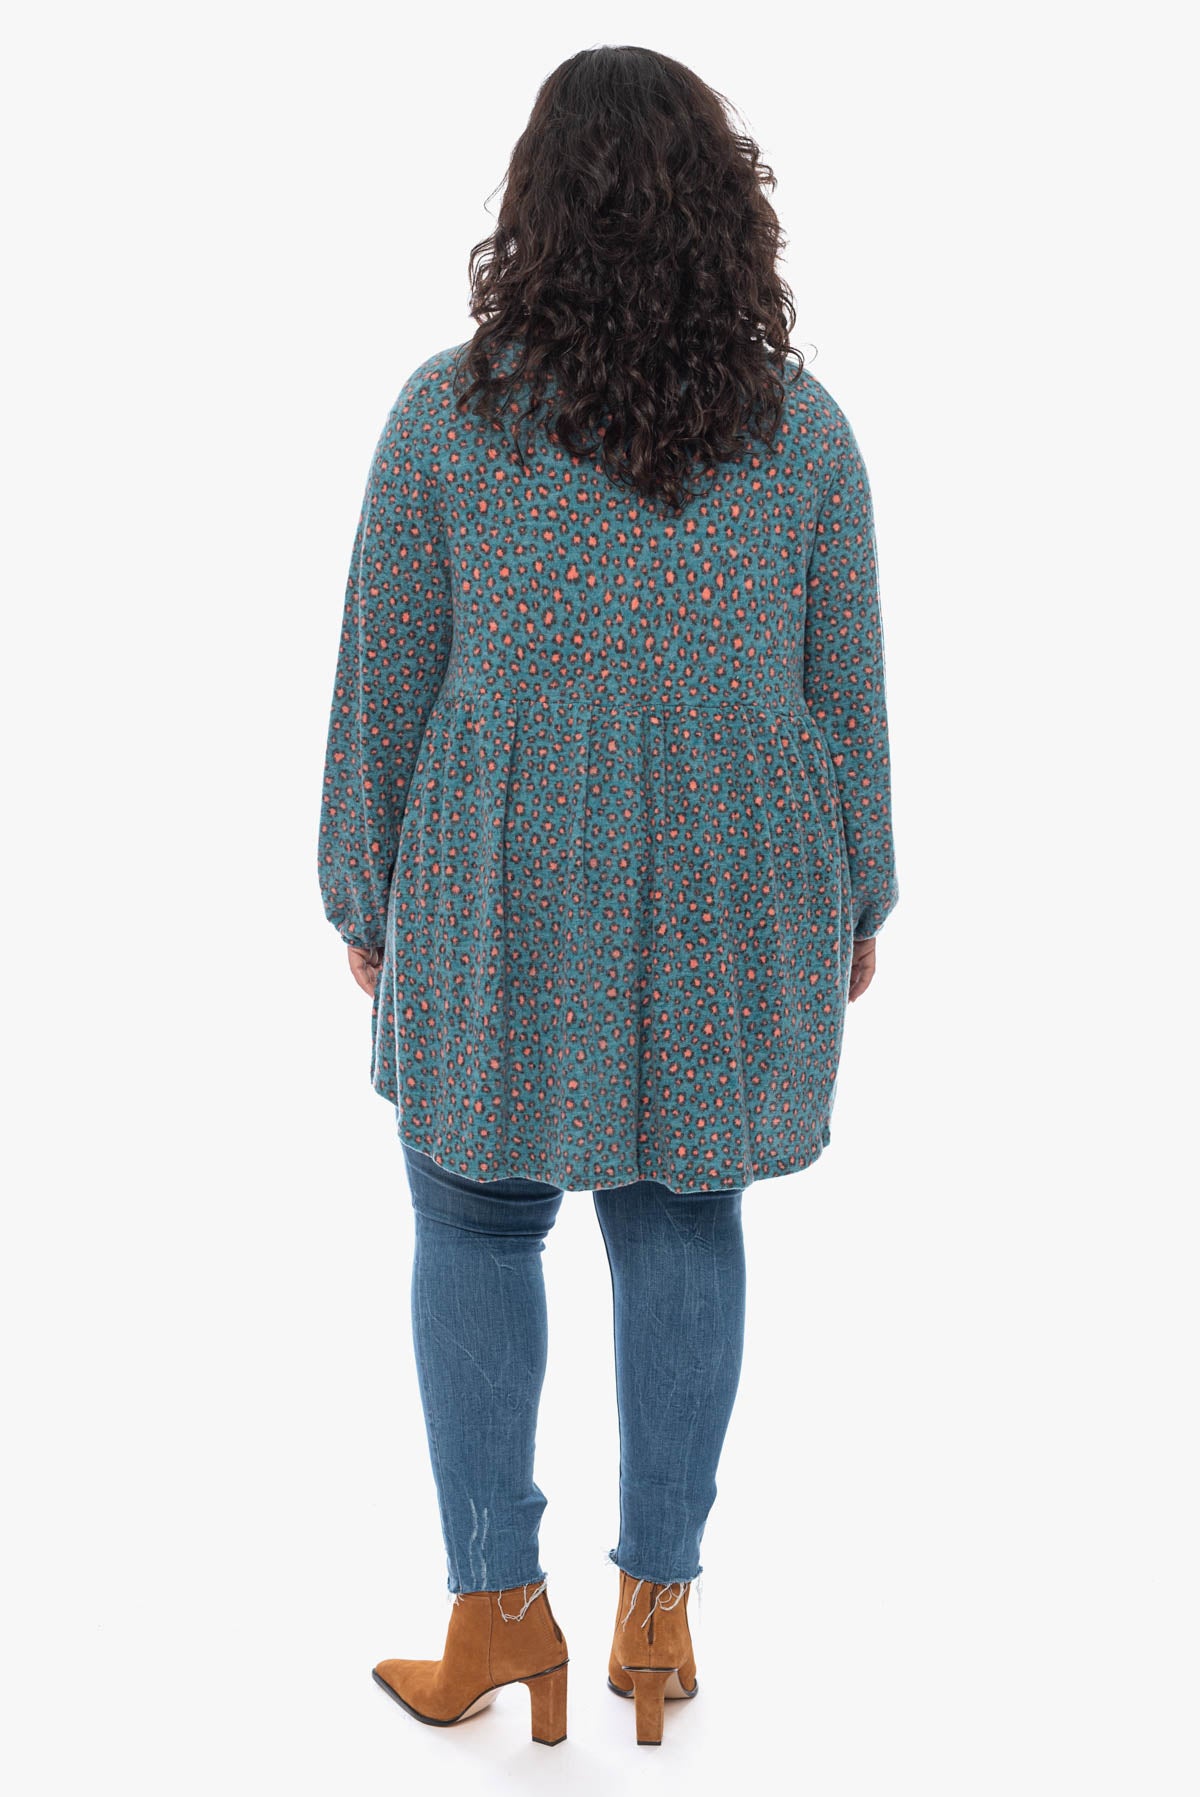 CASEY teal printed tunic